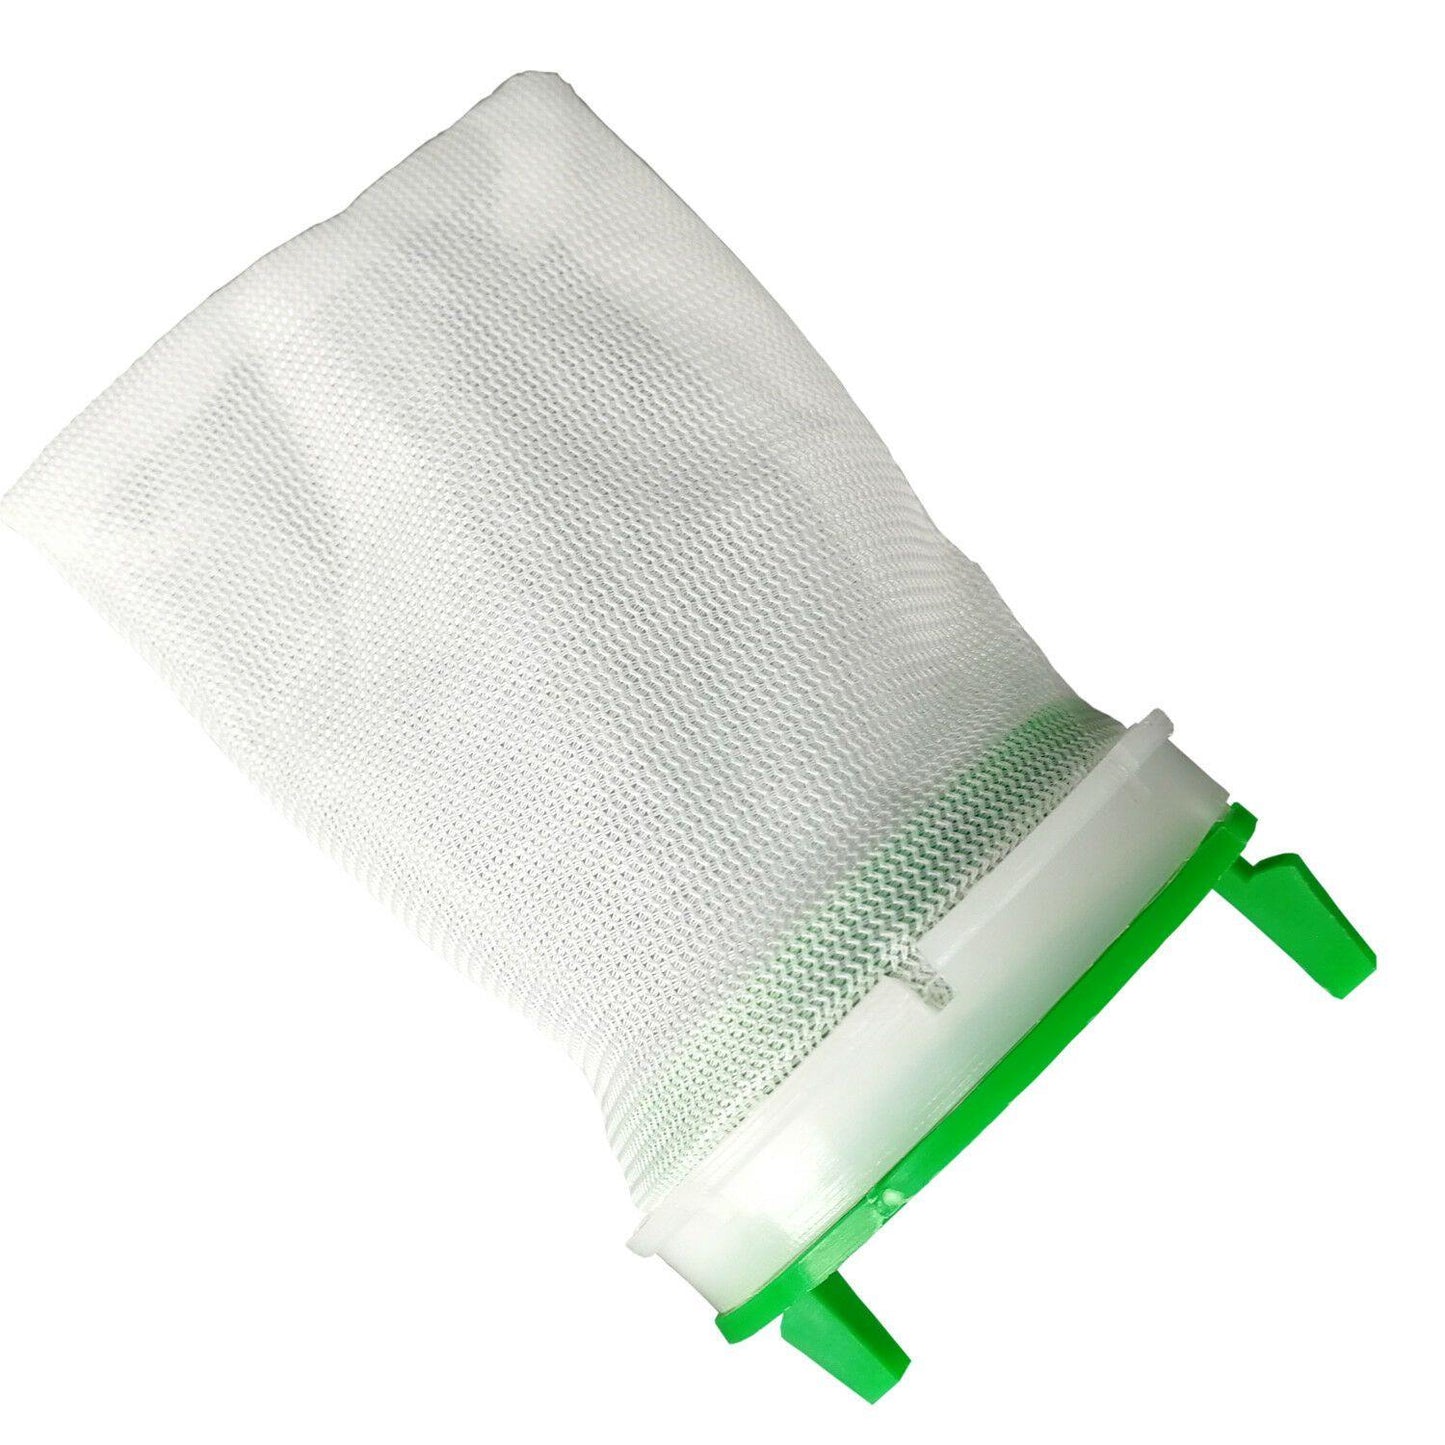 4X Washing Machine Lint Filter Bag For Simpson 36P500M 36S550M 36S550N Washer Sparesbarn